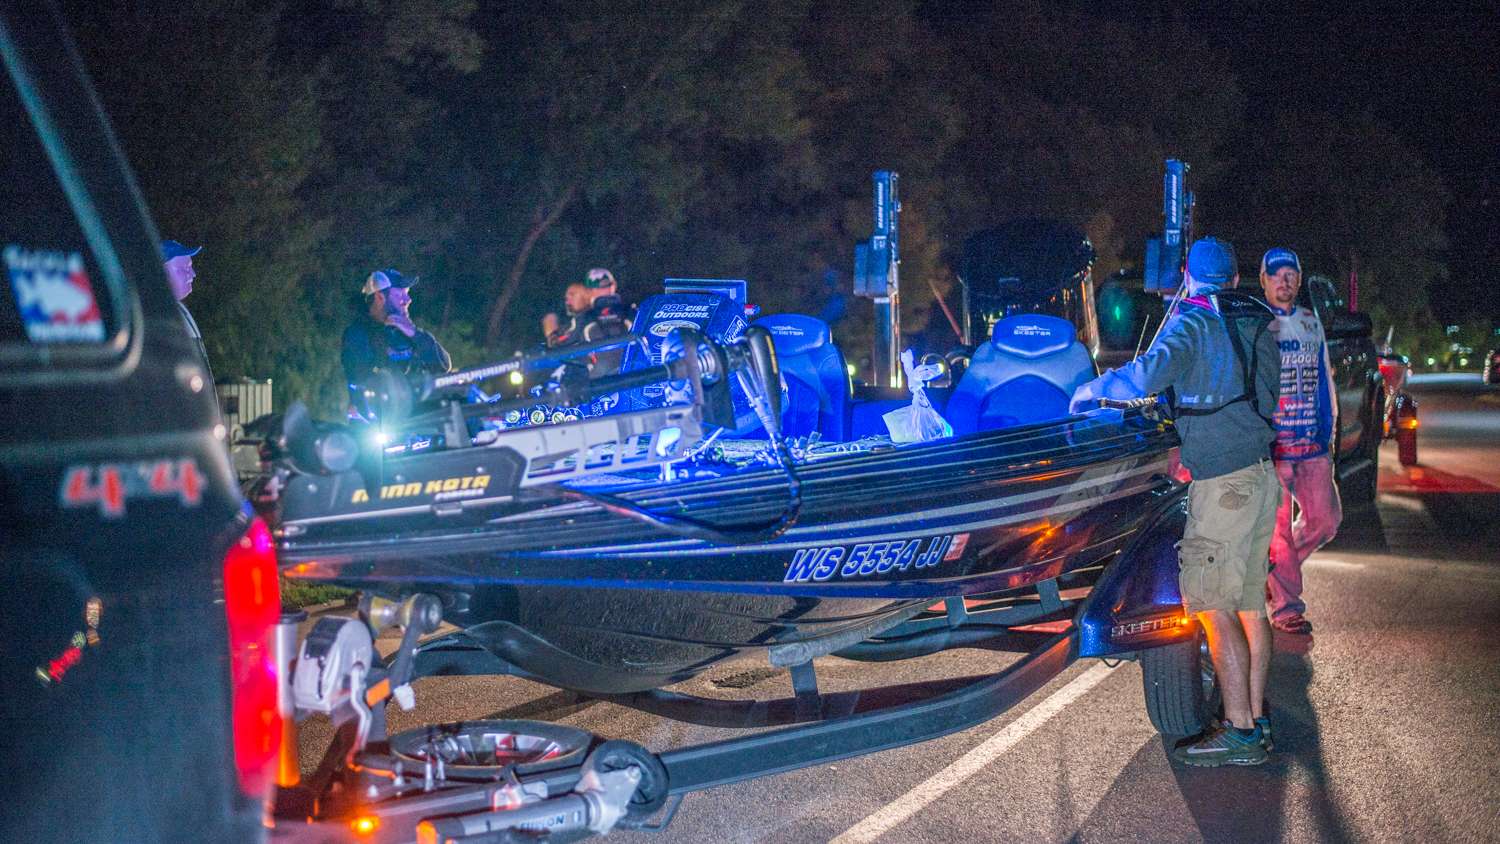 Its an important Day 2 on Lake Champlain at the Bass Pro Shops Northern Open as anglers have a second chance to jockey for position before we cut the field down to the top 12. 